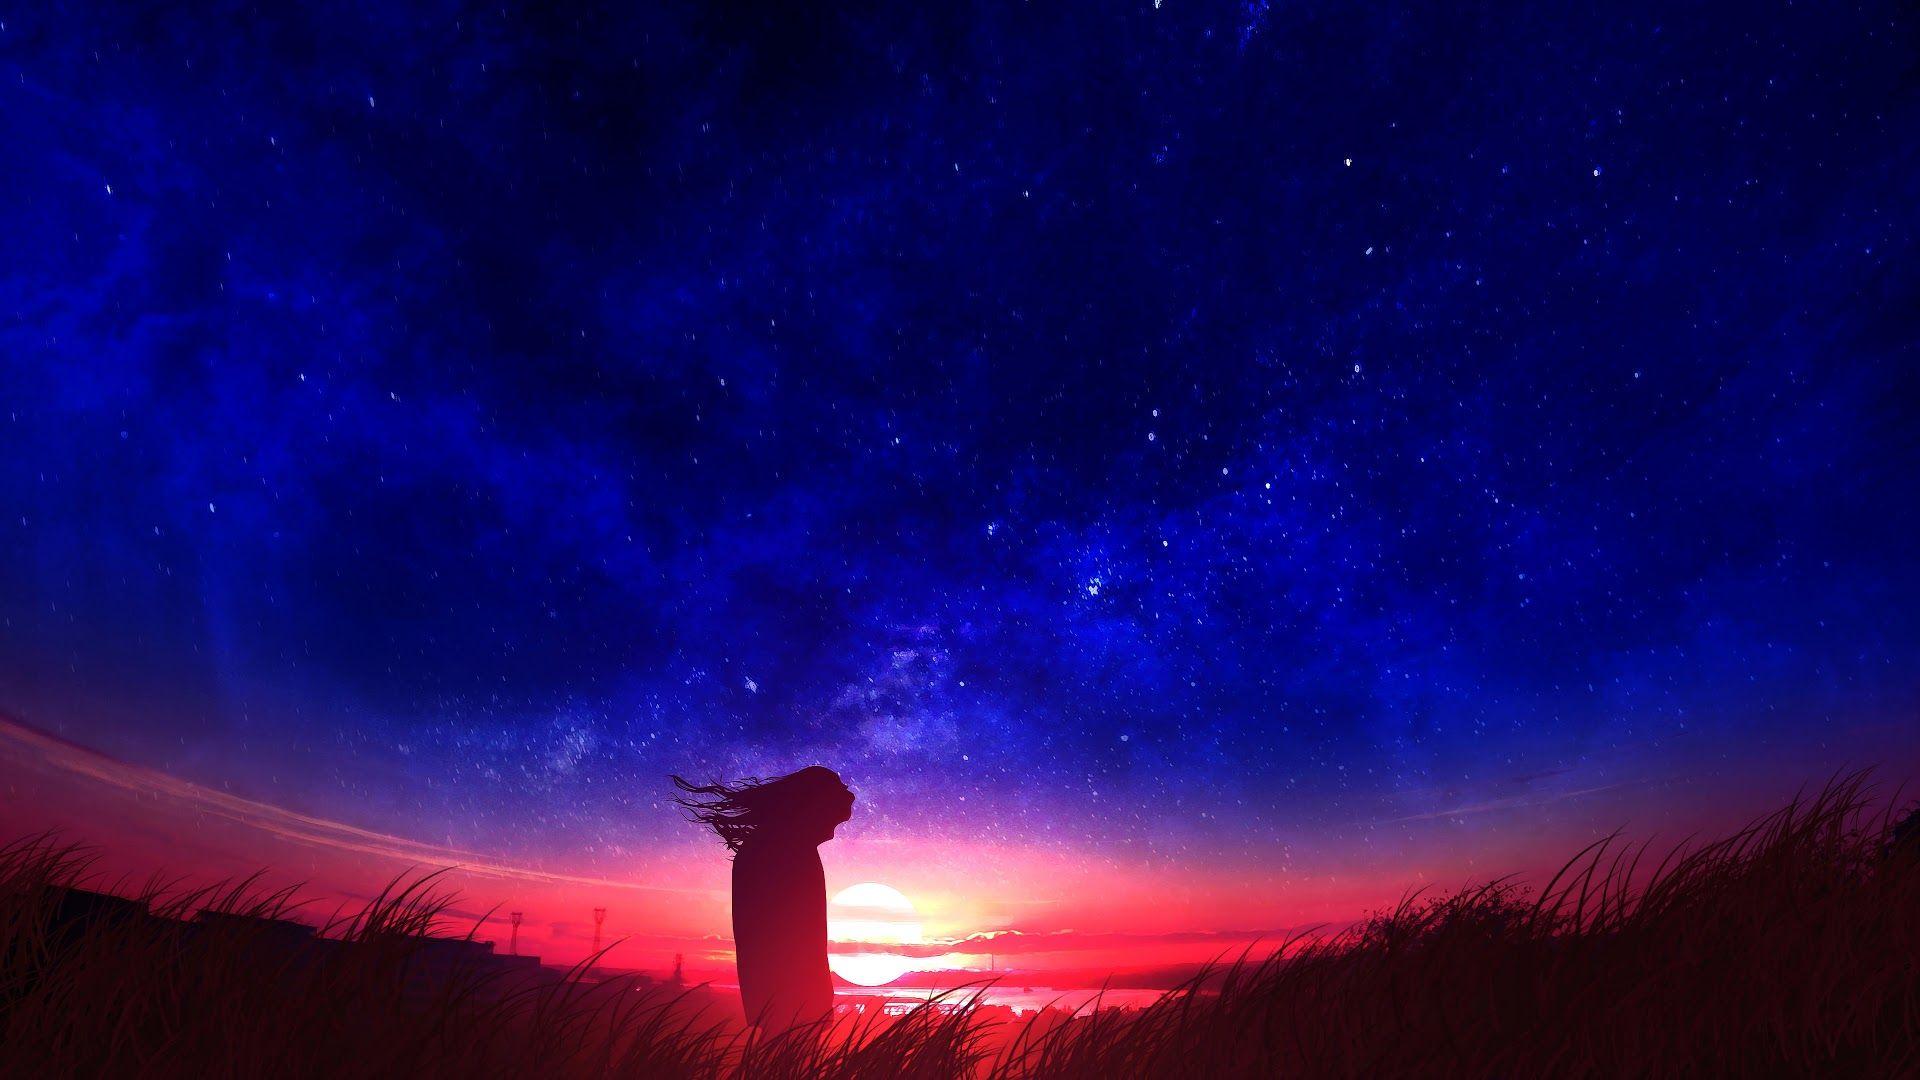 Night Sky Anime Wallpapers Top Free Night Sky Anime Backgrounds Wallpaperaccess 